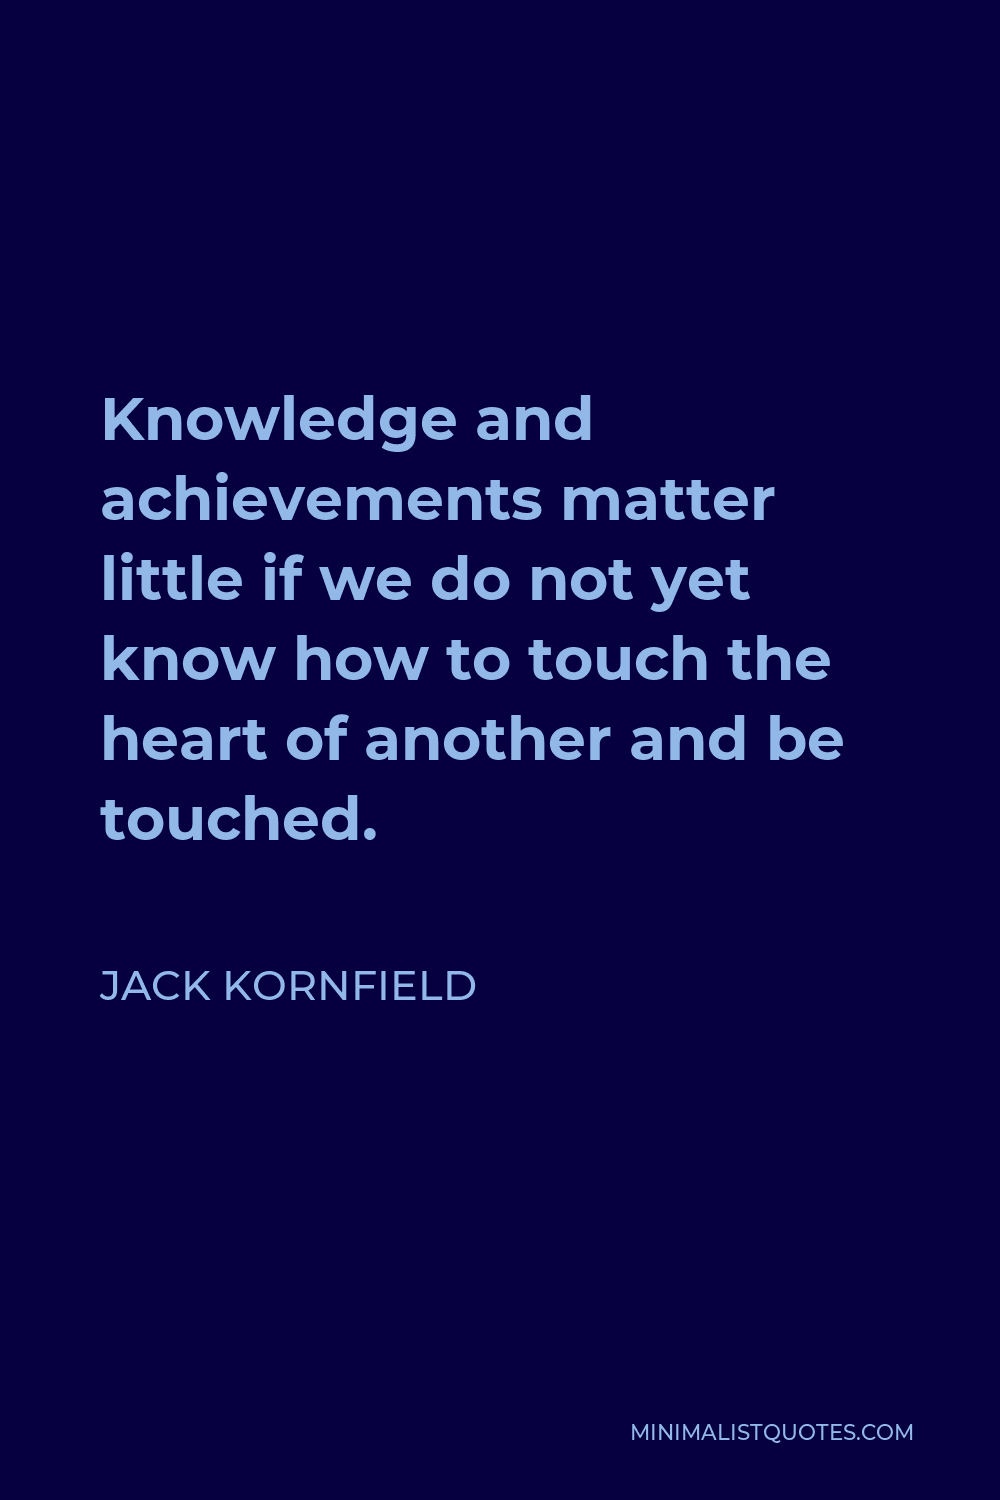 Jack Kornfield Quote - Knowledge and achievements matter little if we do not yet know how to touch the heart of another and be touched.